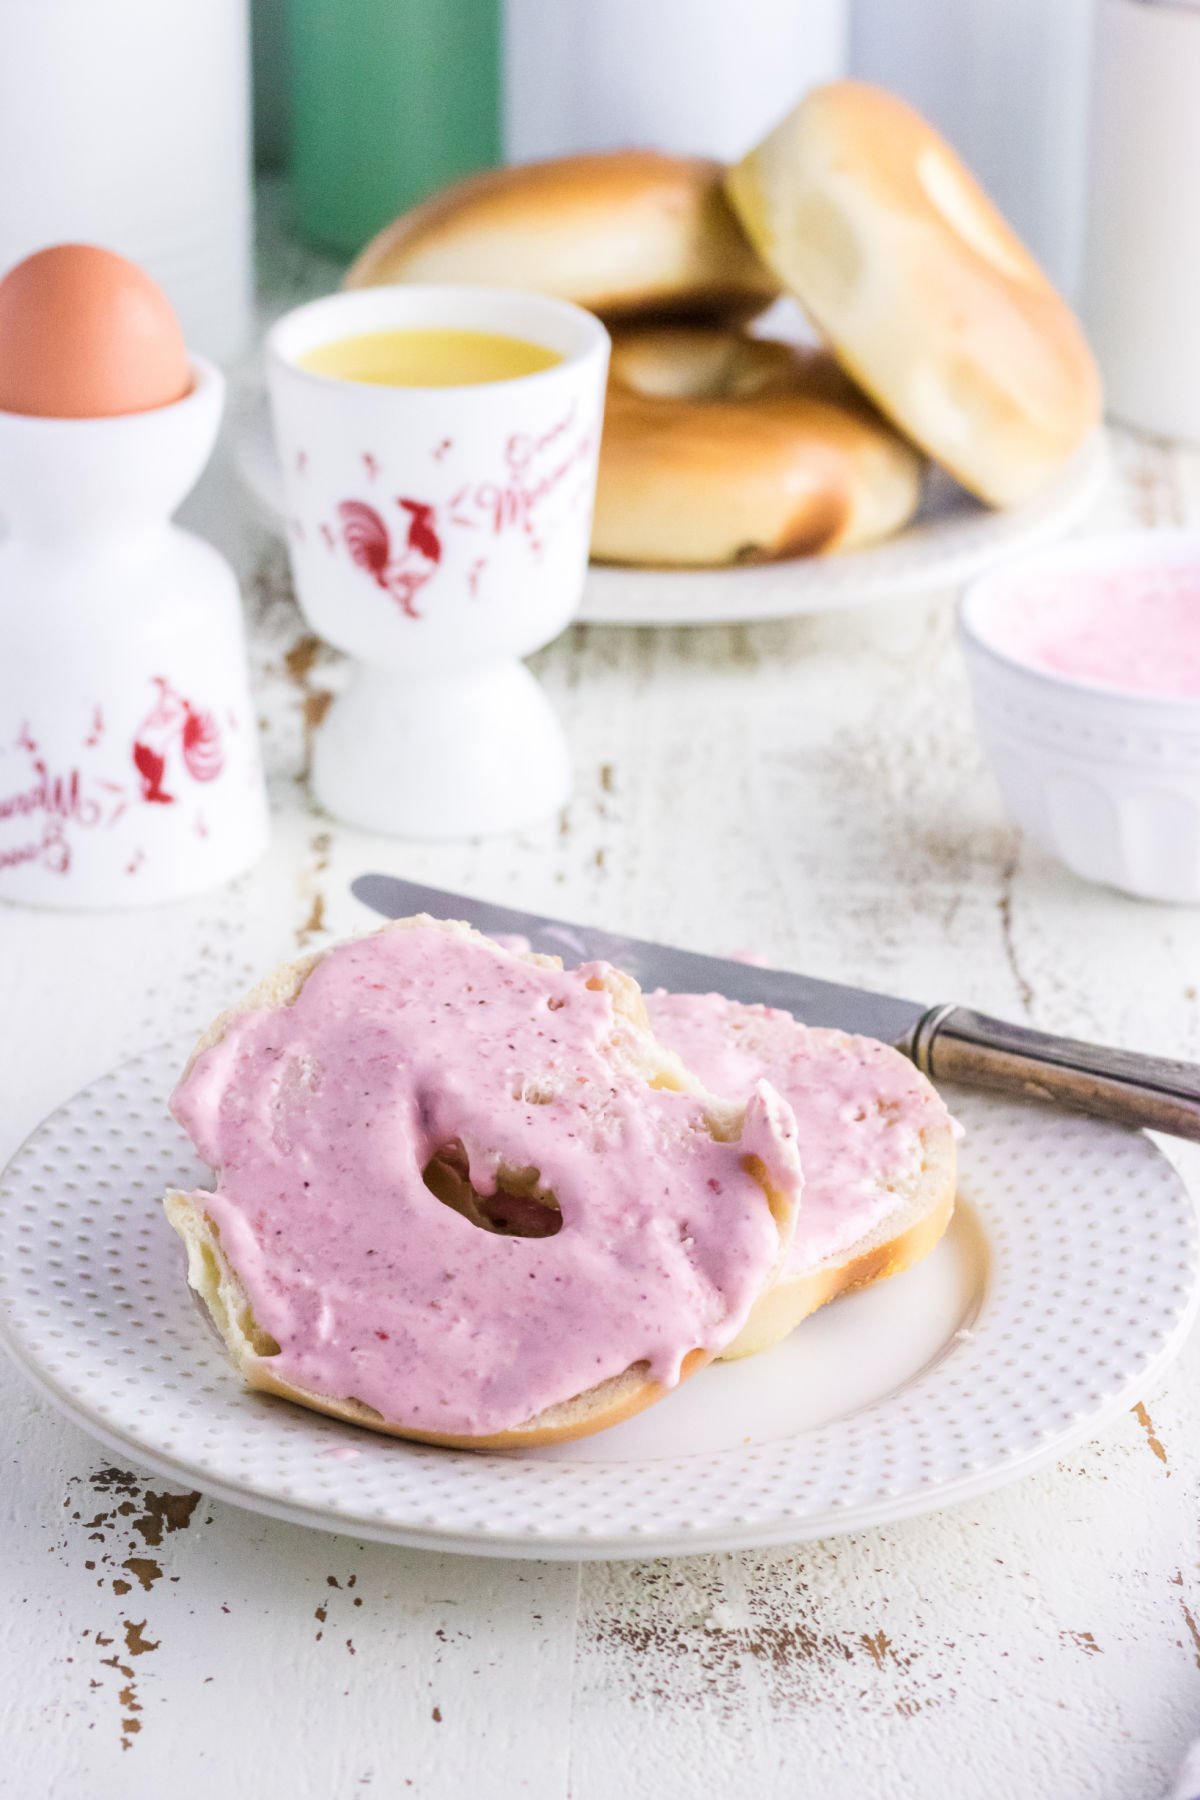 Strawberry cream cheese on bagels.